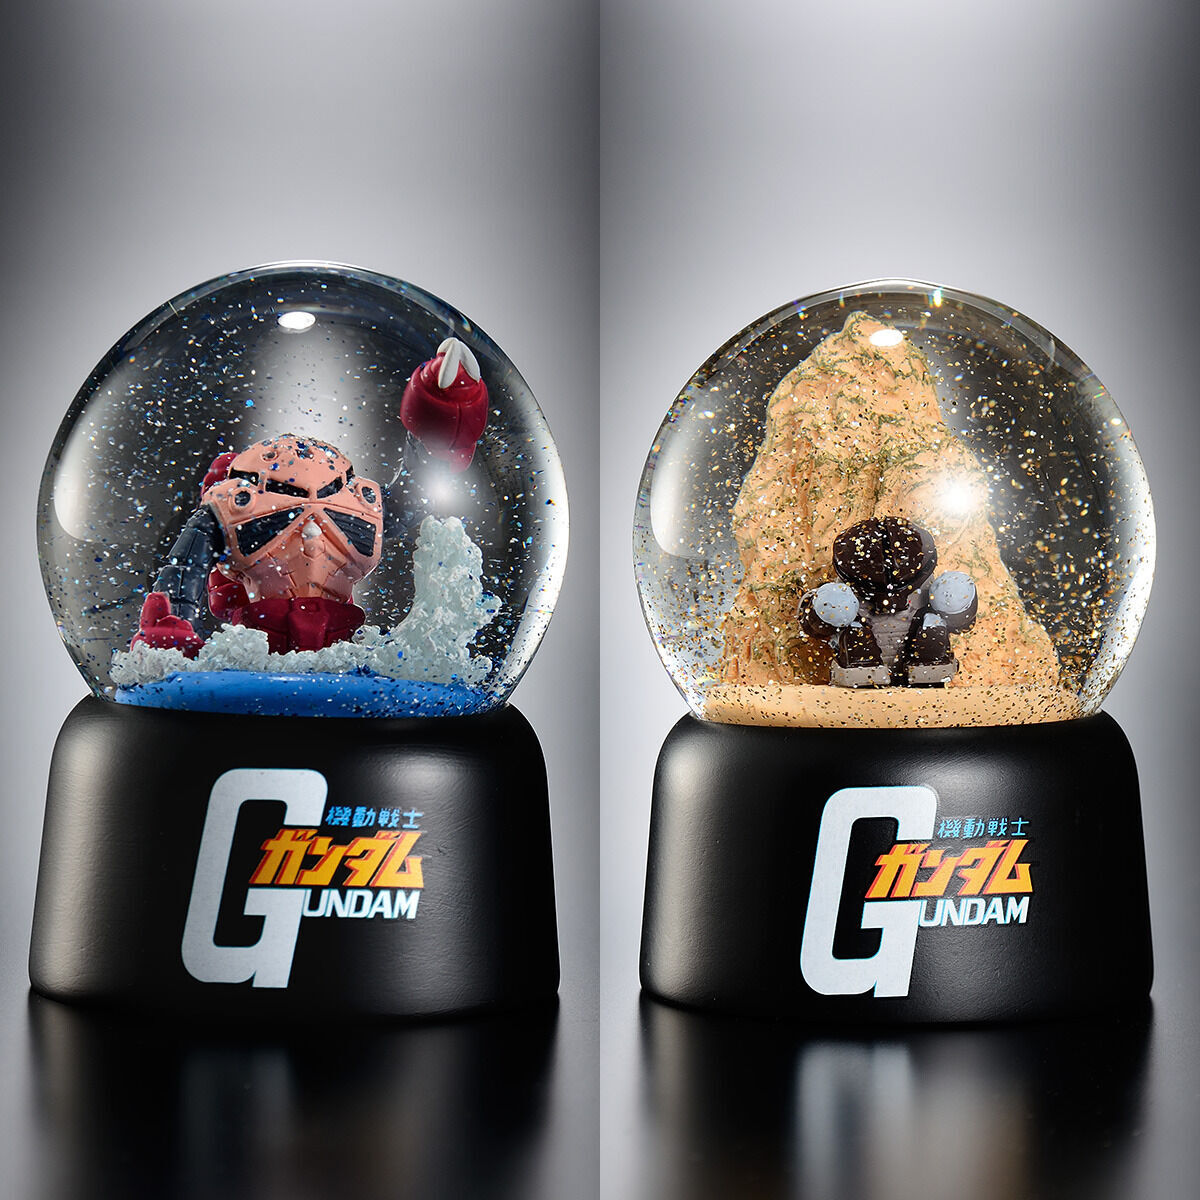 The Snow Globe CHAR'S Z'GOK and The Snow Globe ACGUY BANDAI